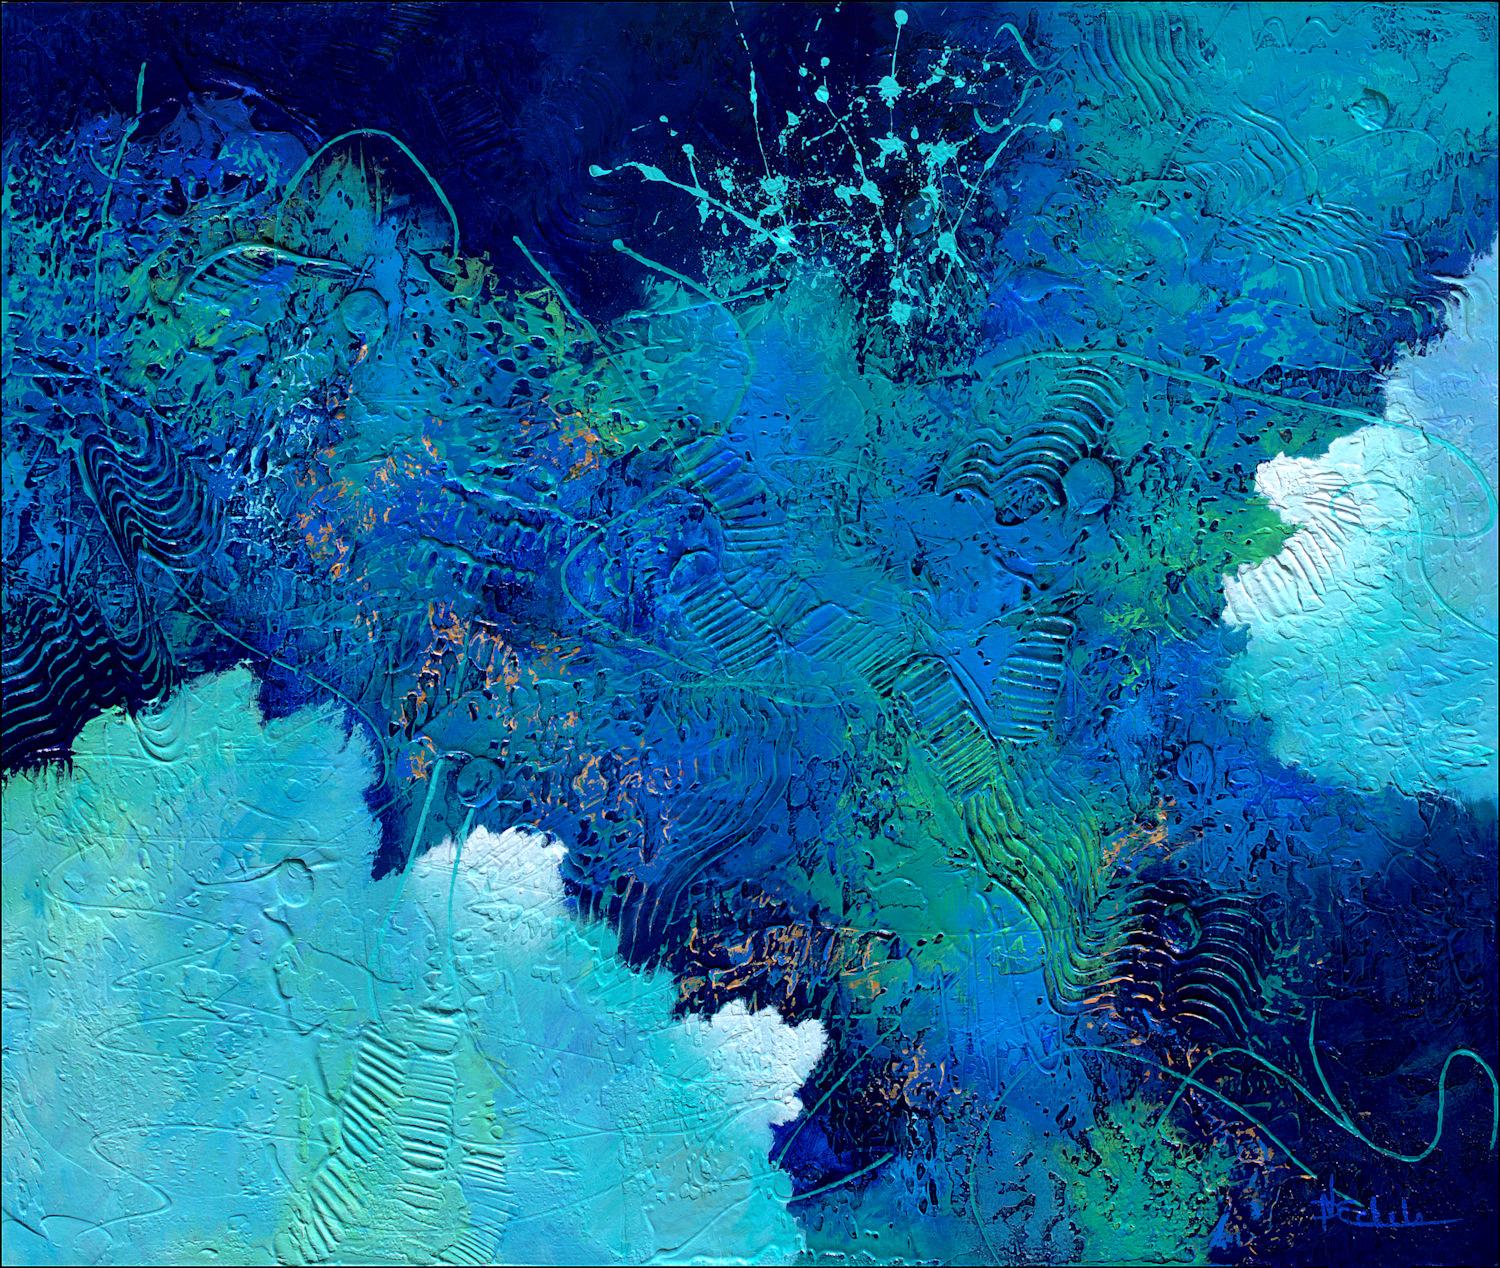 Nancy Eckels Abstract Painting - "Quirky Water" Mixed Media abstract with textural rich blues, teal, aqua